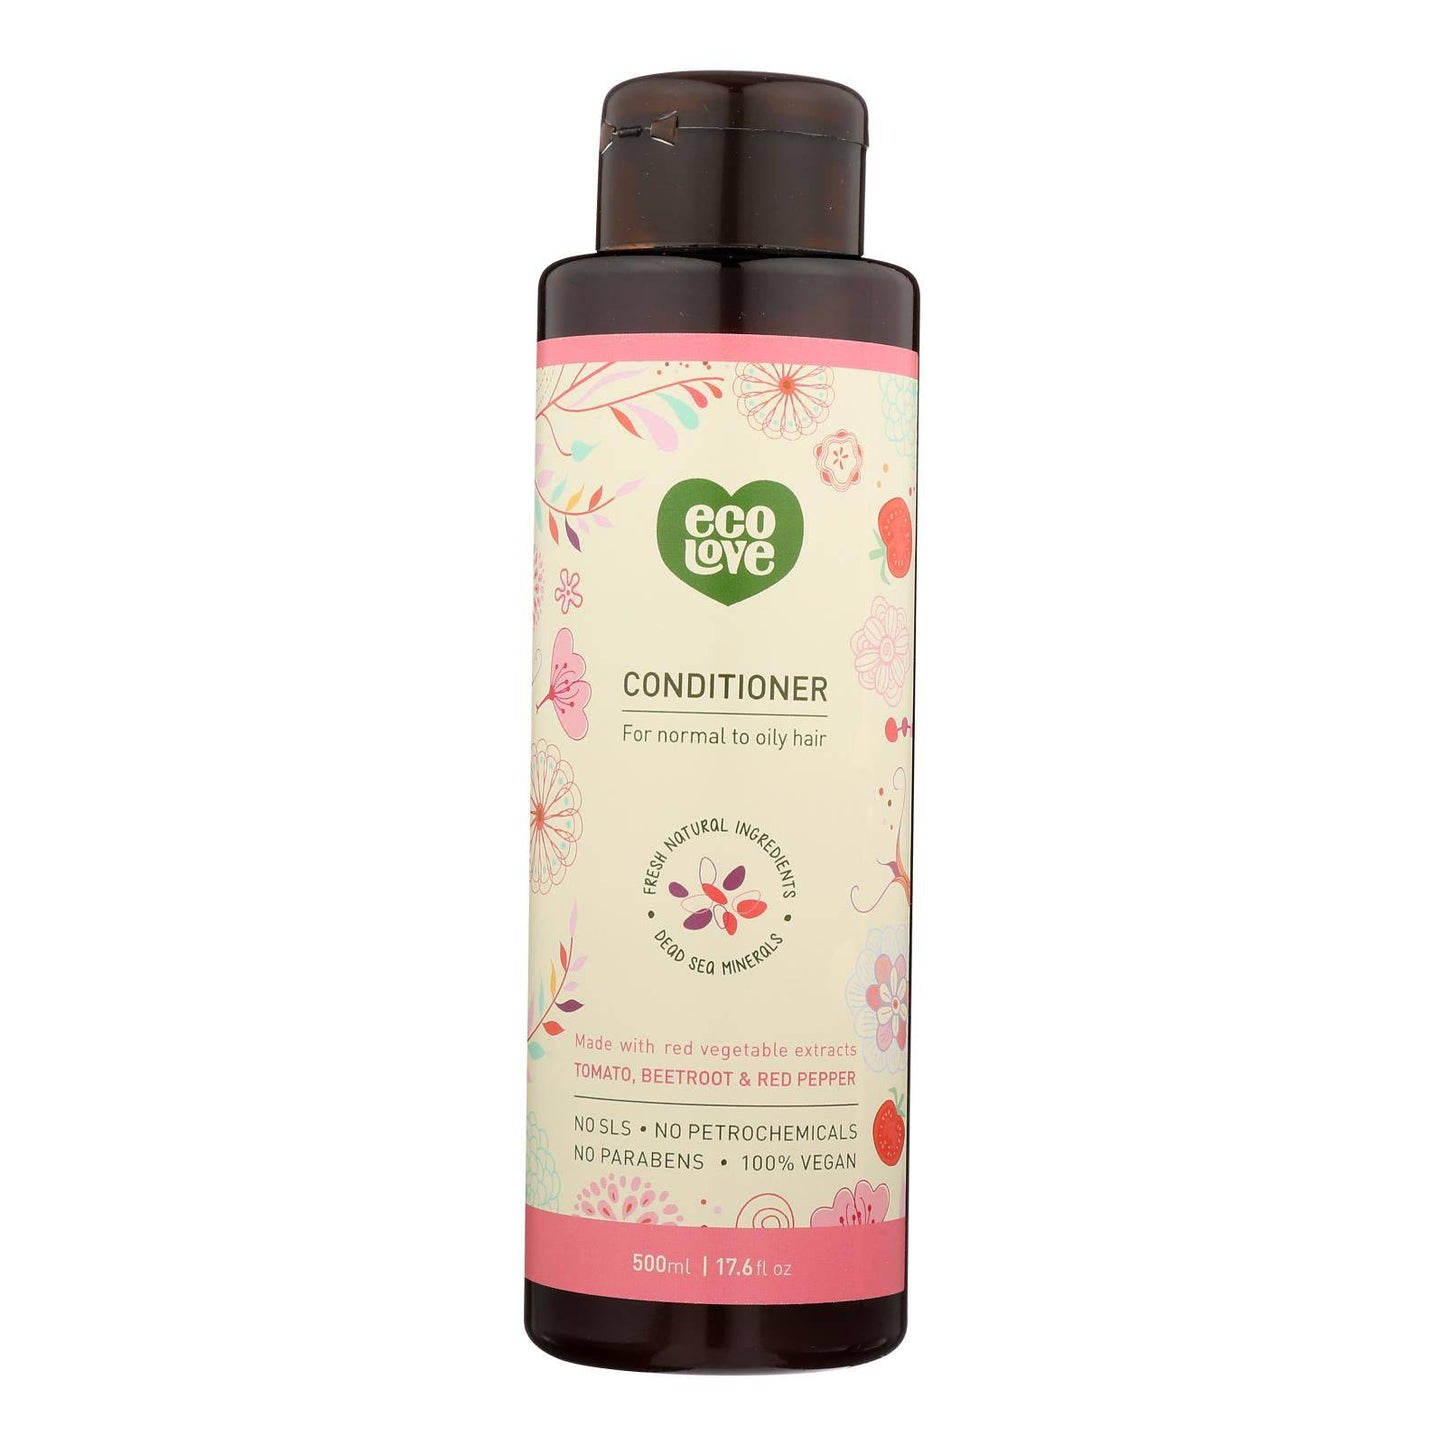 Buy Ecolove Conditioner - Red Vegetables Conditioner For Normal To Oily Hair - Case Of 1 - 17.6 Fl Oz.  at OnlyNaturals.us